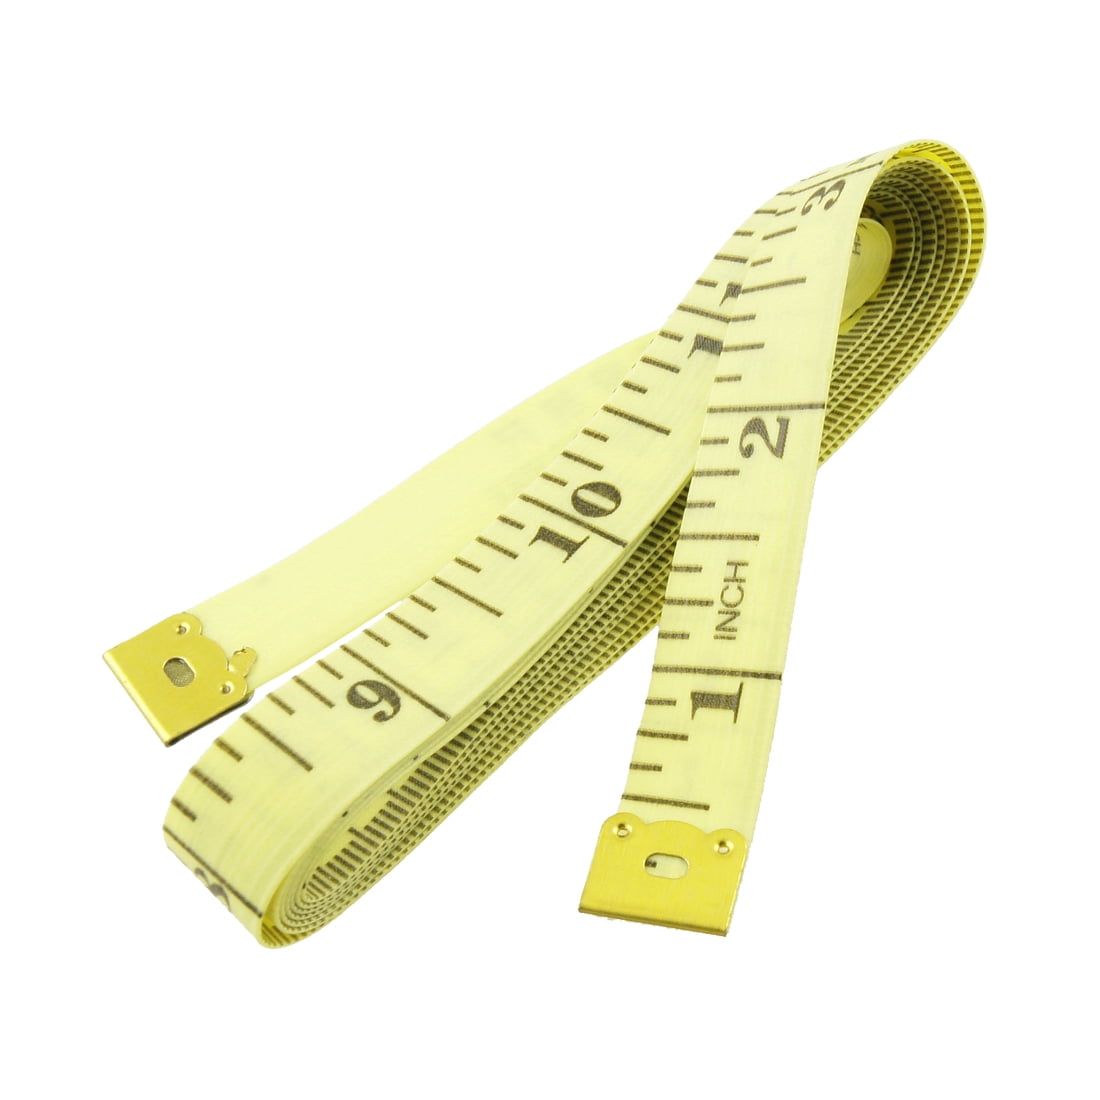 60 Inch Inch/Metric Tape Measure Tailor Sewing Cloth Ruler